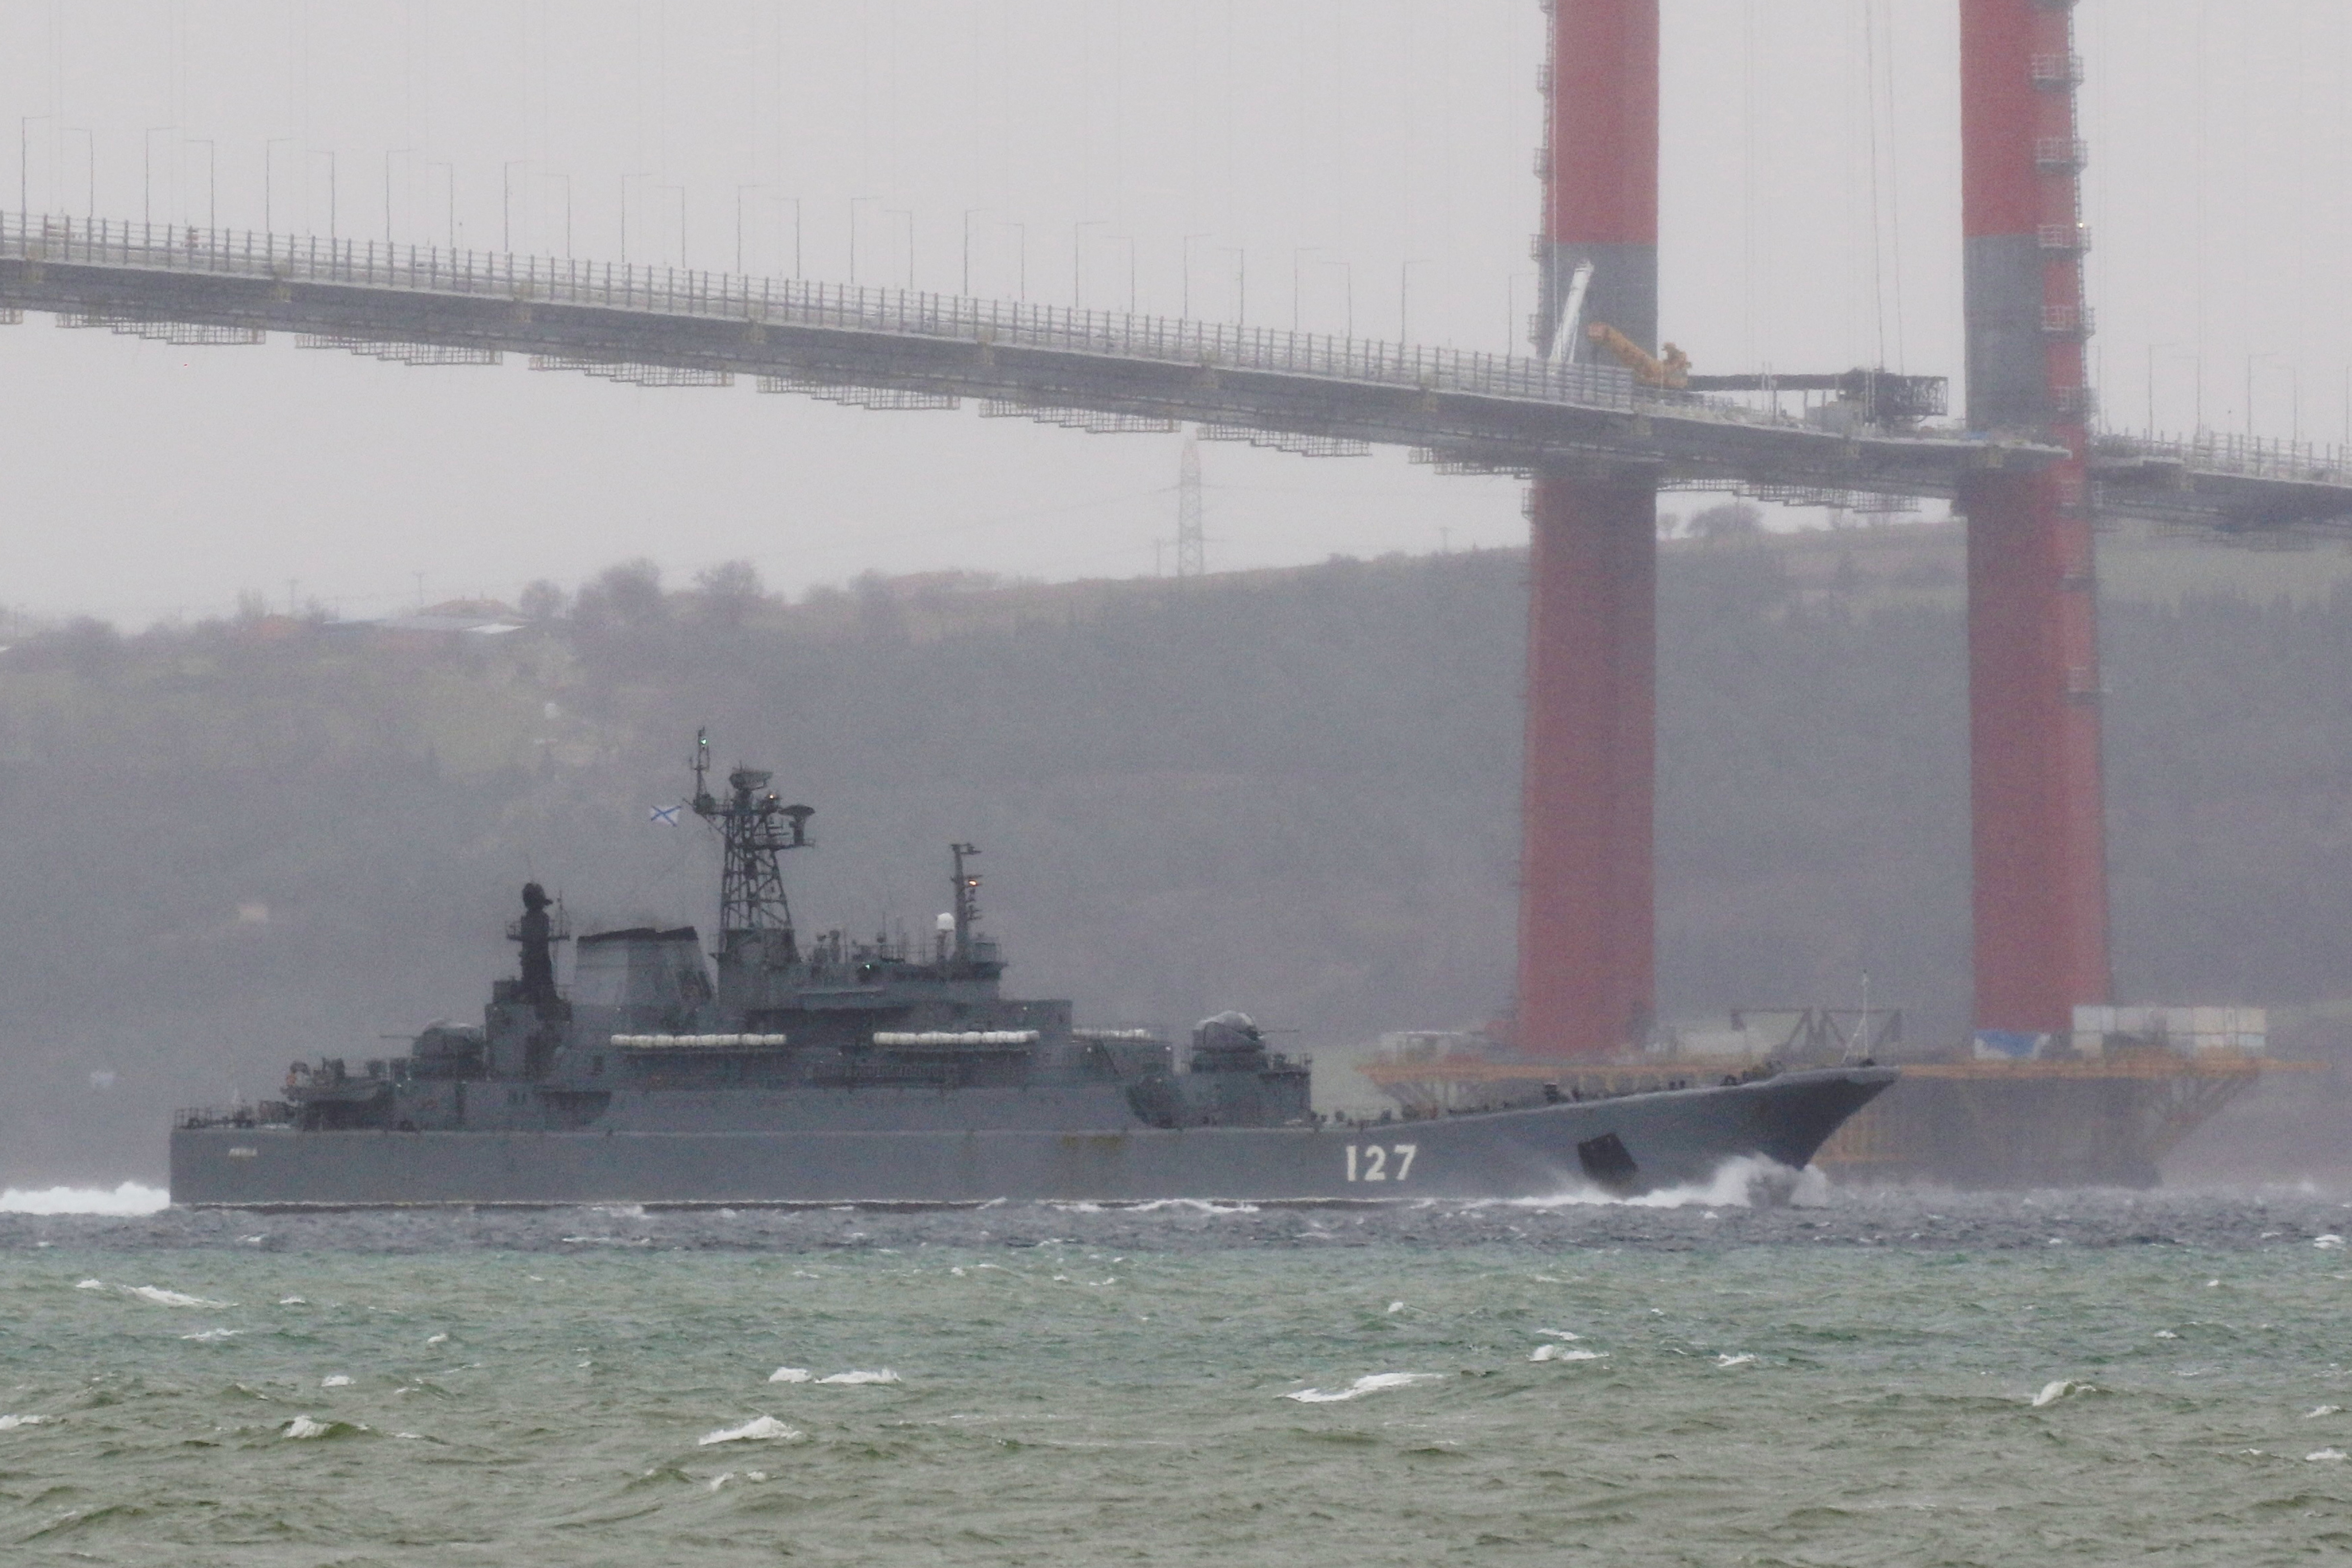 The Russian Navy's landing ship Minsk sets sail in the Dardanelles